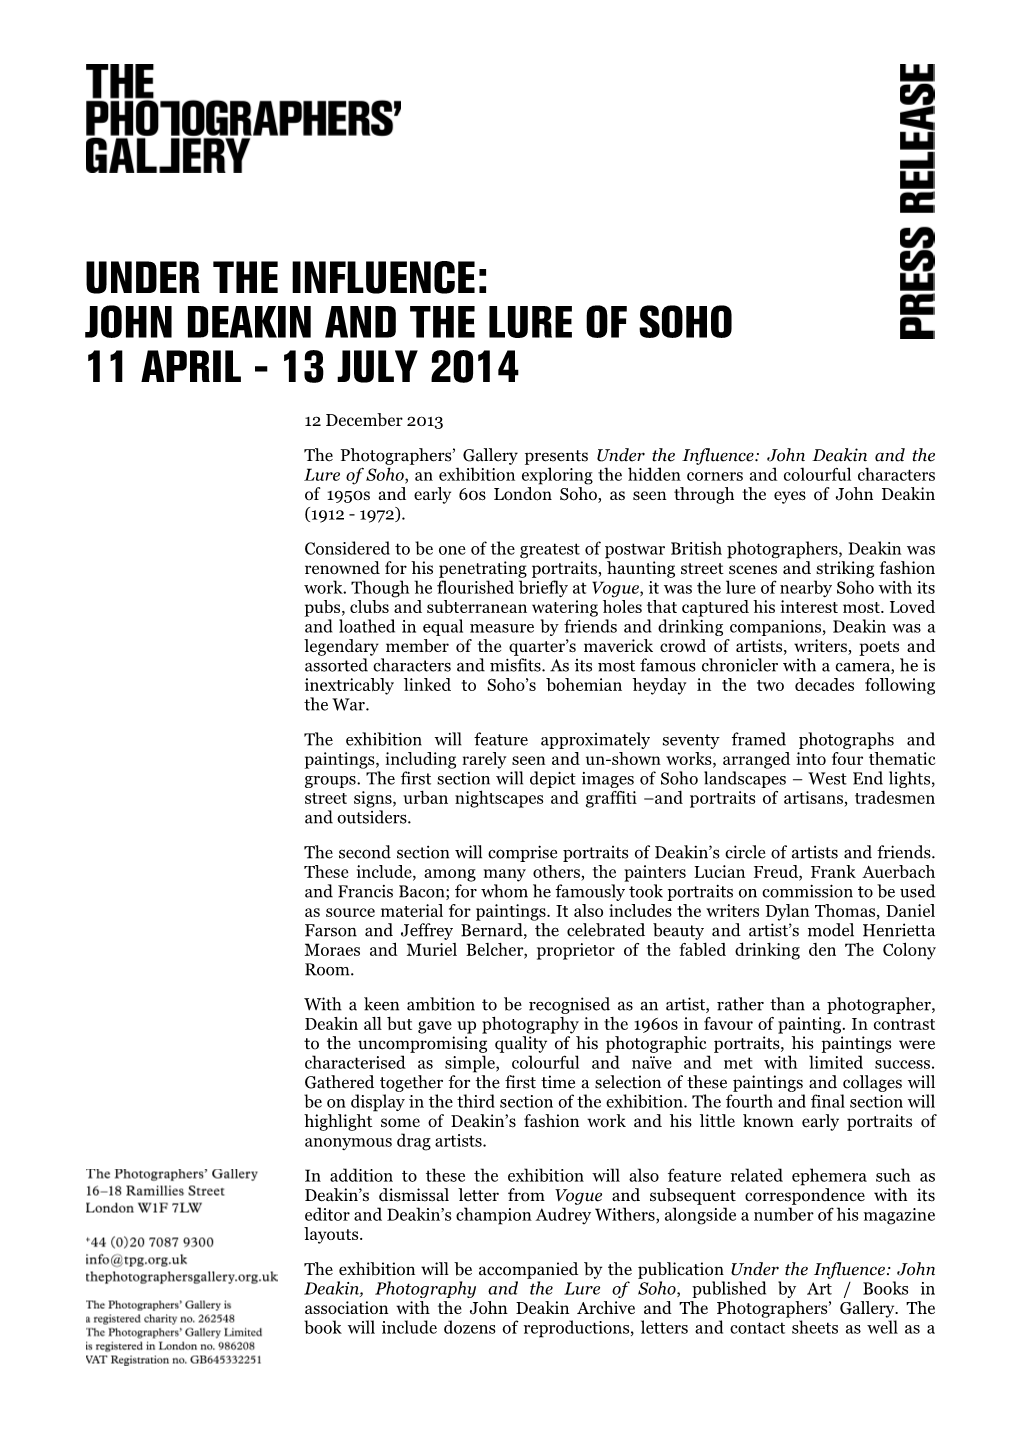 John Deakin and the Lure of Soho 11 April - 13 July 2014